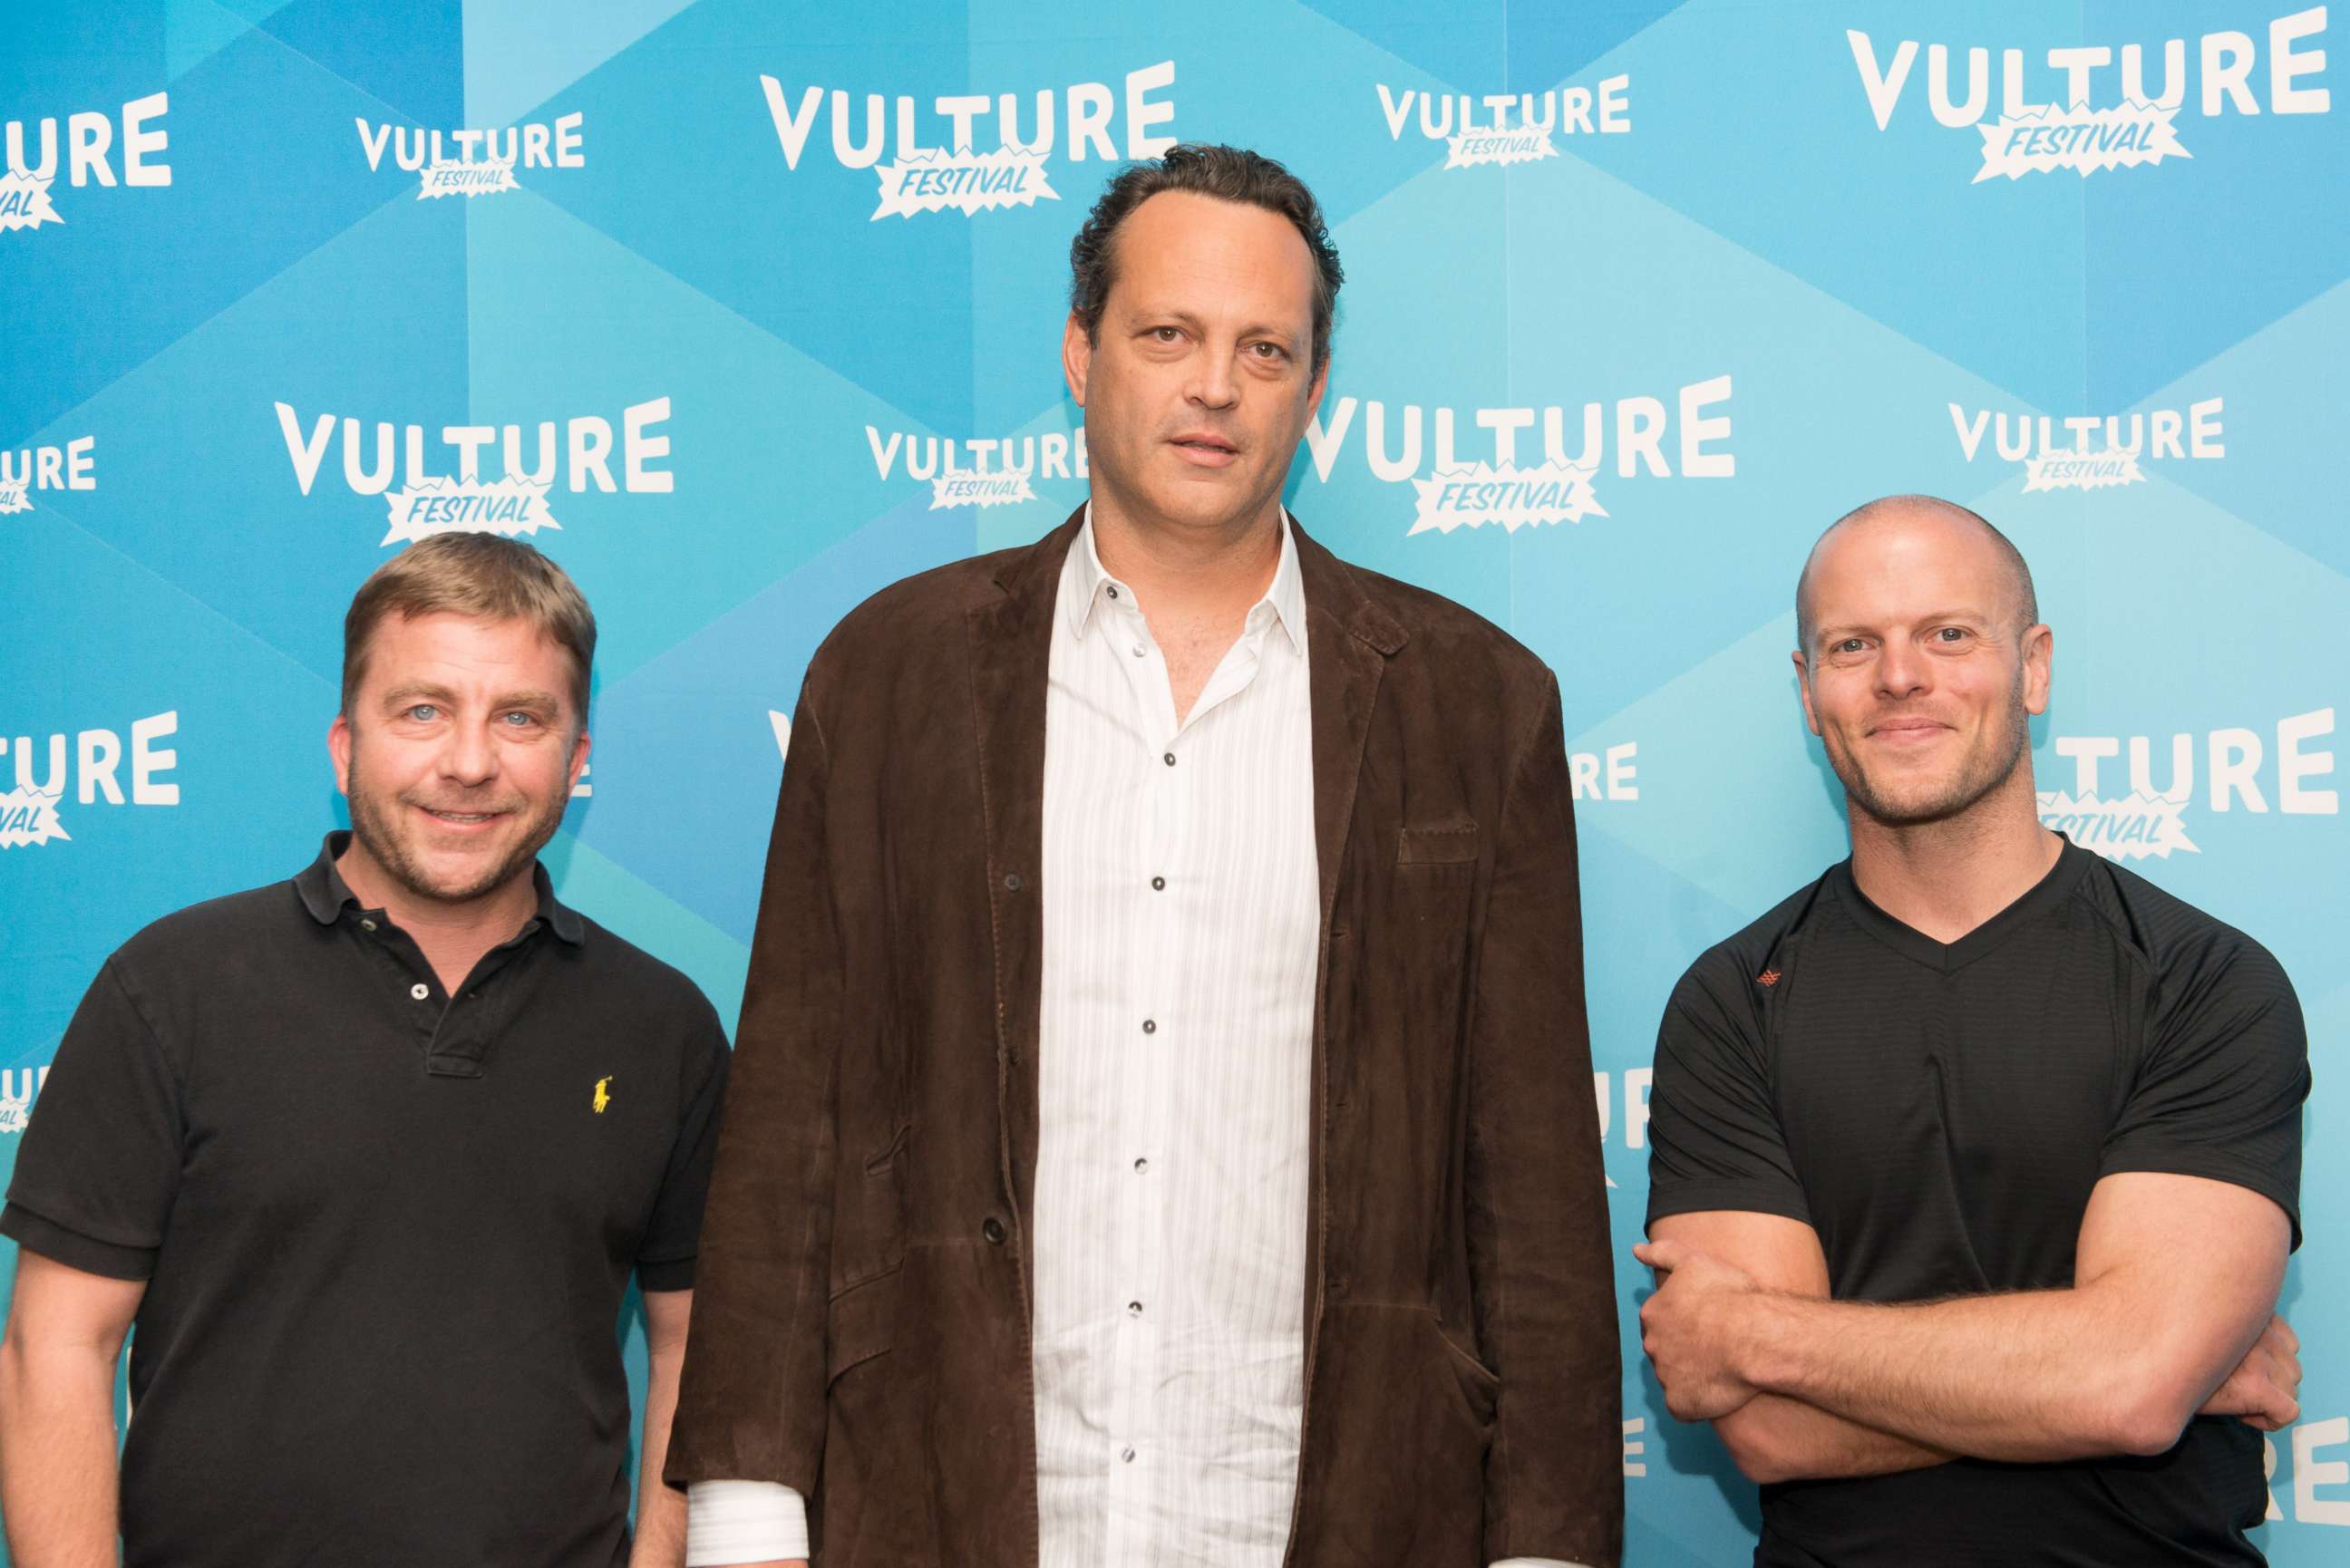 PHOTO: Peter Billingsley, Vince Vaughn and Tim Ferriss attend The Vulture Festival at Milk Studios, May 20, 2017, in New York.